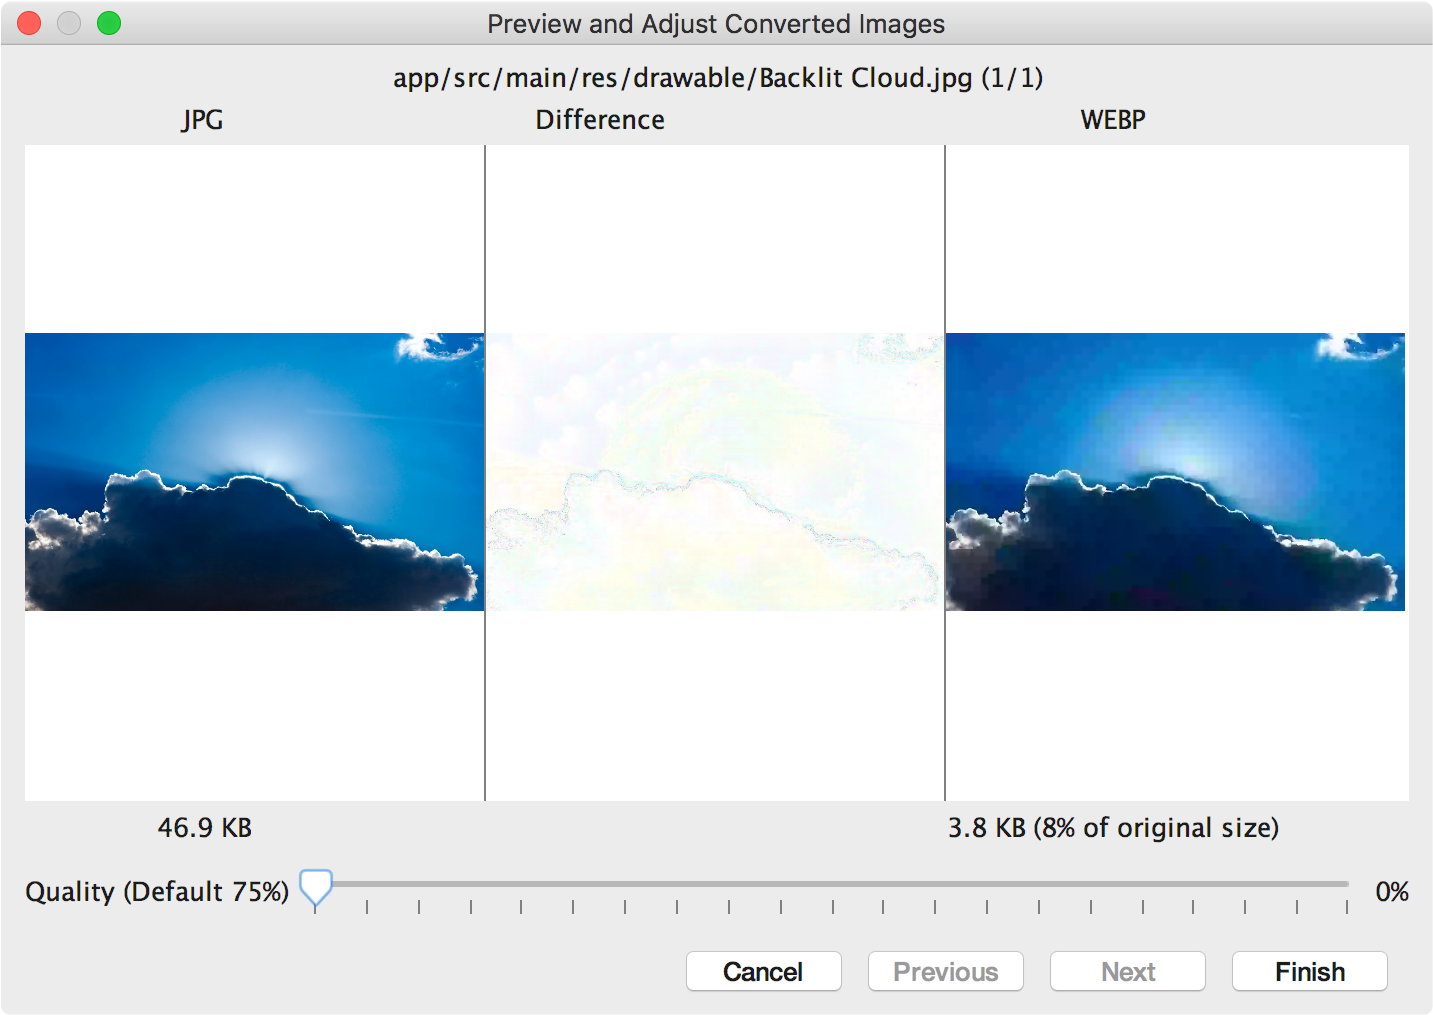 Converting a JPG to WebP format at 0% quality